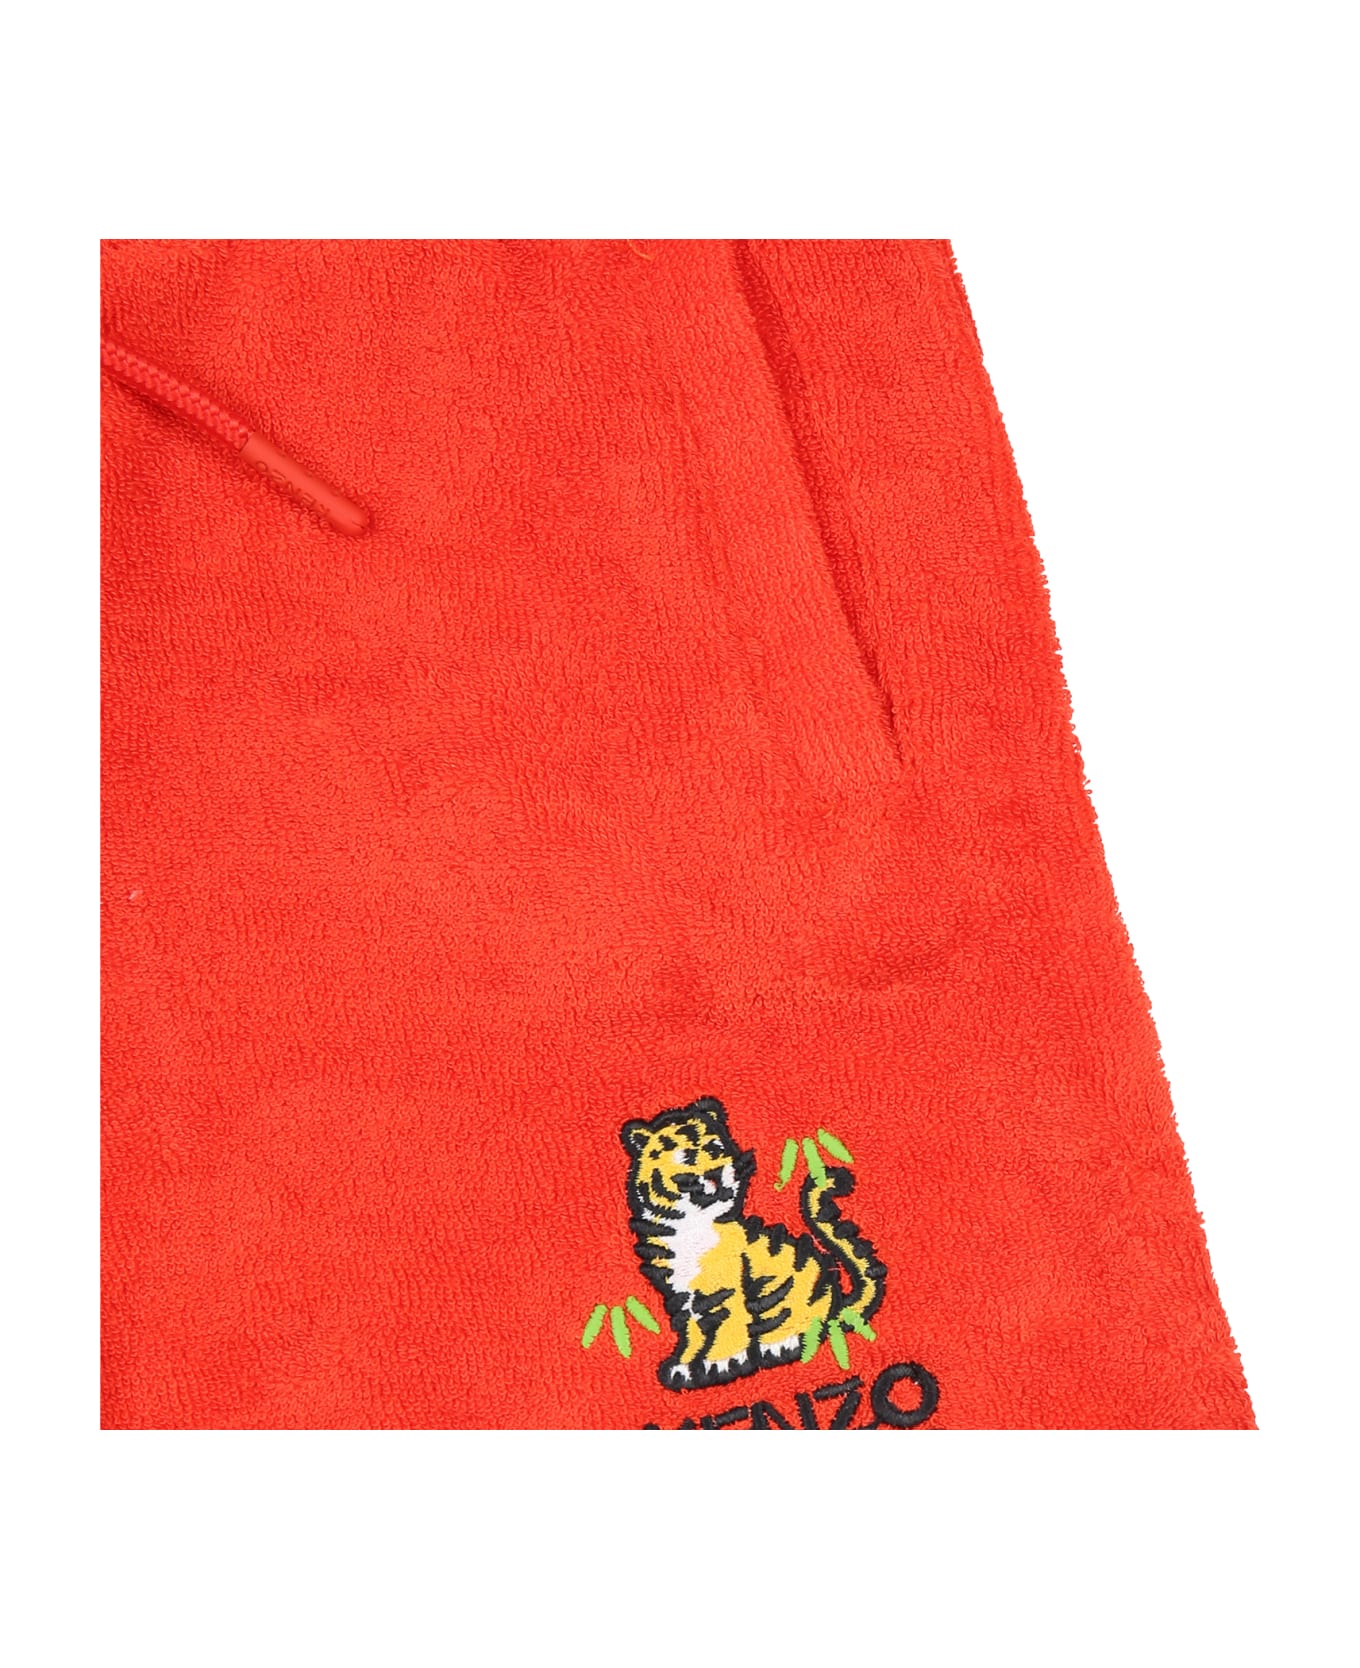 Kenzo Kids White Suit For Baby Boy With Tiger - Rosso ボトムス